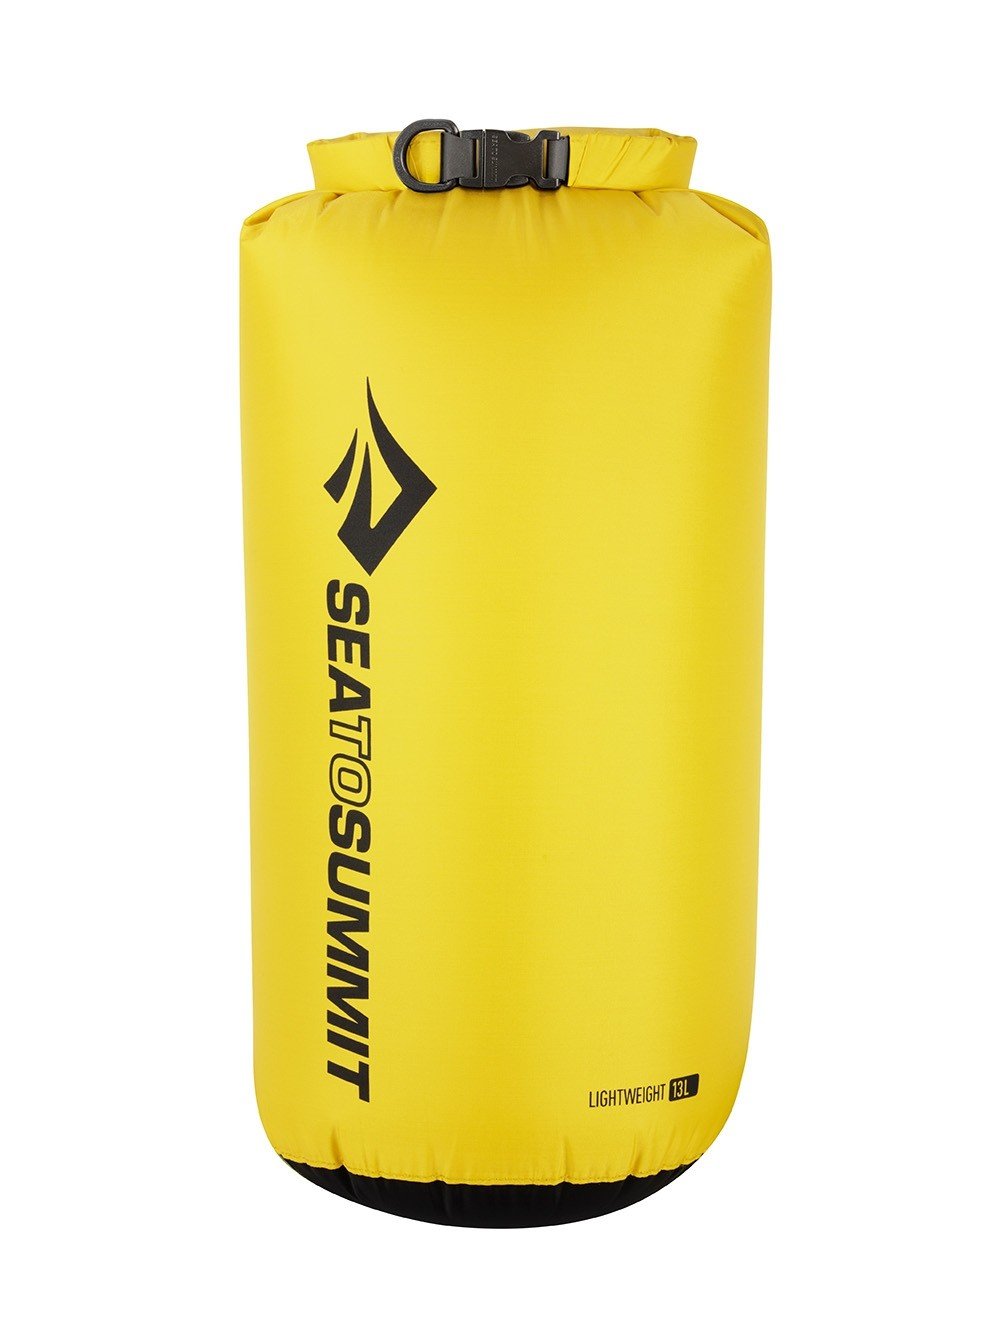 Sea To Summit Lightweight 70D 13 Litres Dry Sack Bags, Packs and Cases Sea To Summit Yellow Tactical Gear Supplier Tactical Distributors Australia